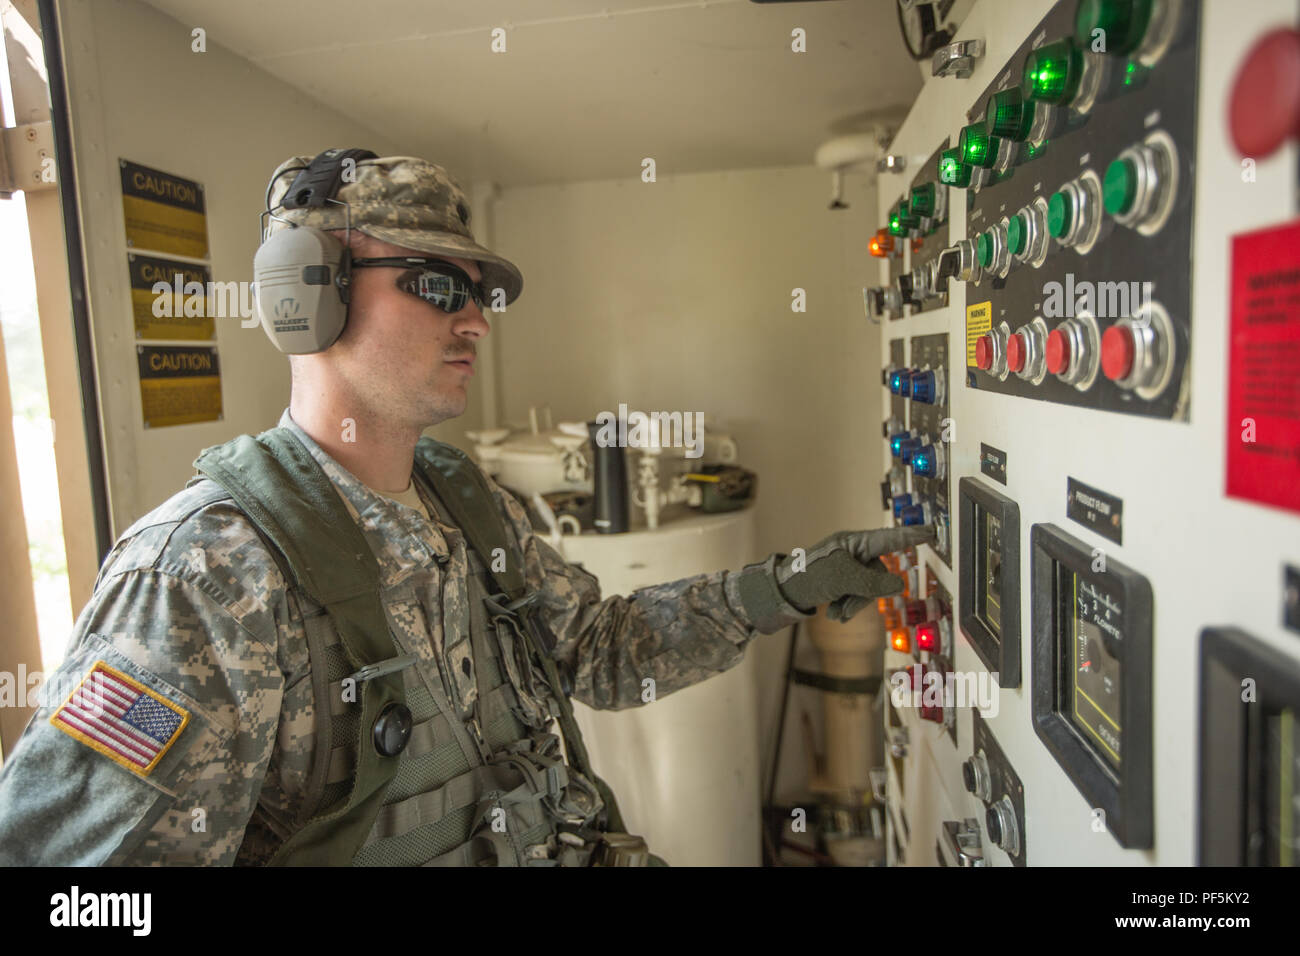 U.S. Army Reserve Spc, Kyle Lee, 651st Quartermaster Company, 79th Sustainment Support Command, Operates the control board of a Reverse Osmosis Water Purification Unit (ROWPU) during Combat Support Training Exercise (CSTX) 86-18-02 at Fort McCoy, Wis., August 15, 2018.  This is the second CSTX of the summer for the 86th Training Division. The CSTX exercise is a large-scale training event where units experience tactical training scenarios specifically designed to replicate real-world missions. (U.S. Army Reserve Photo by Spc. John Russell) Stock Photo